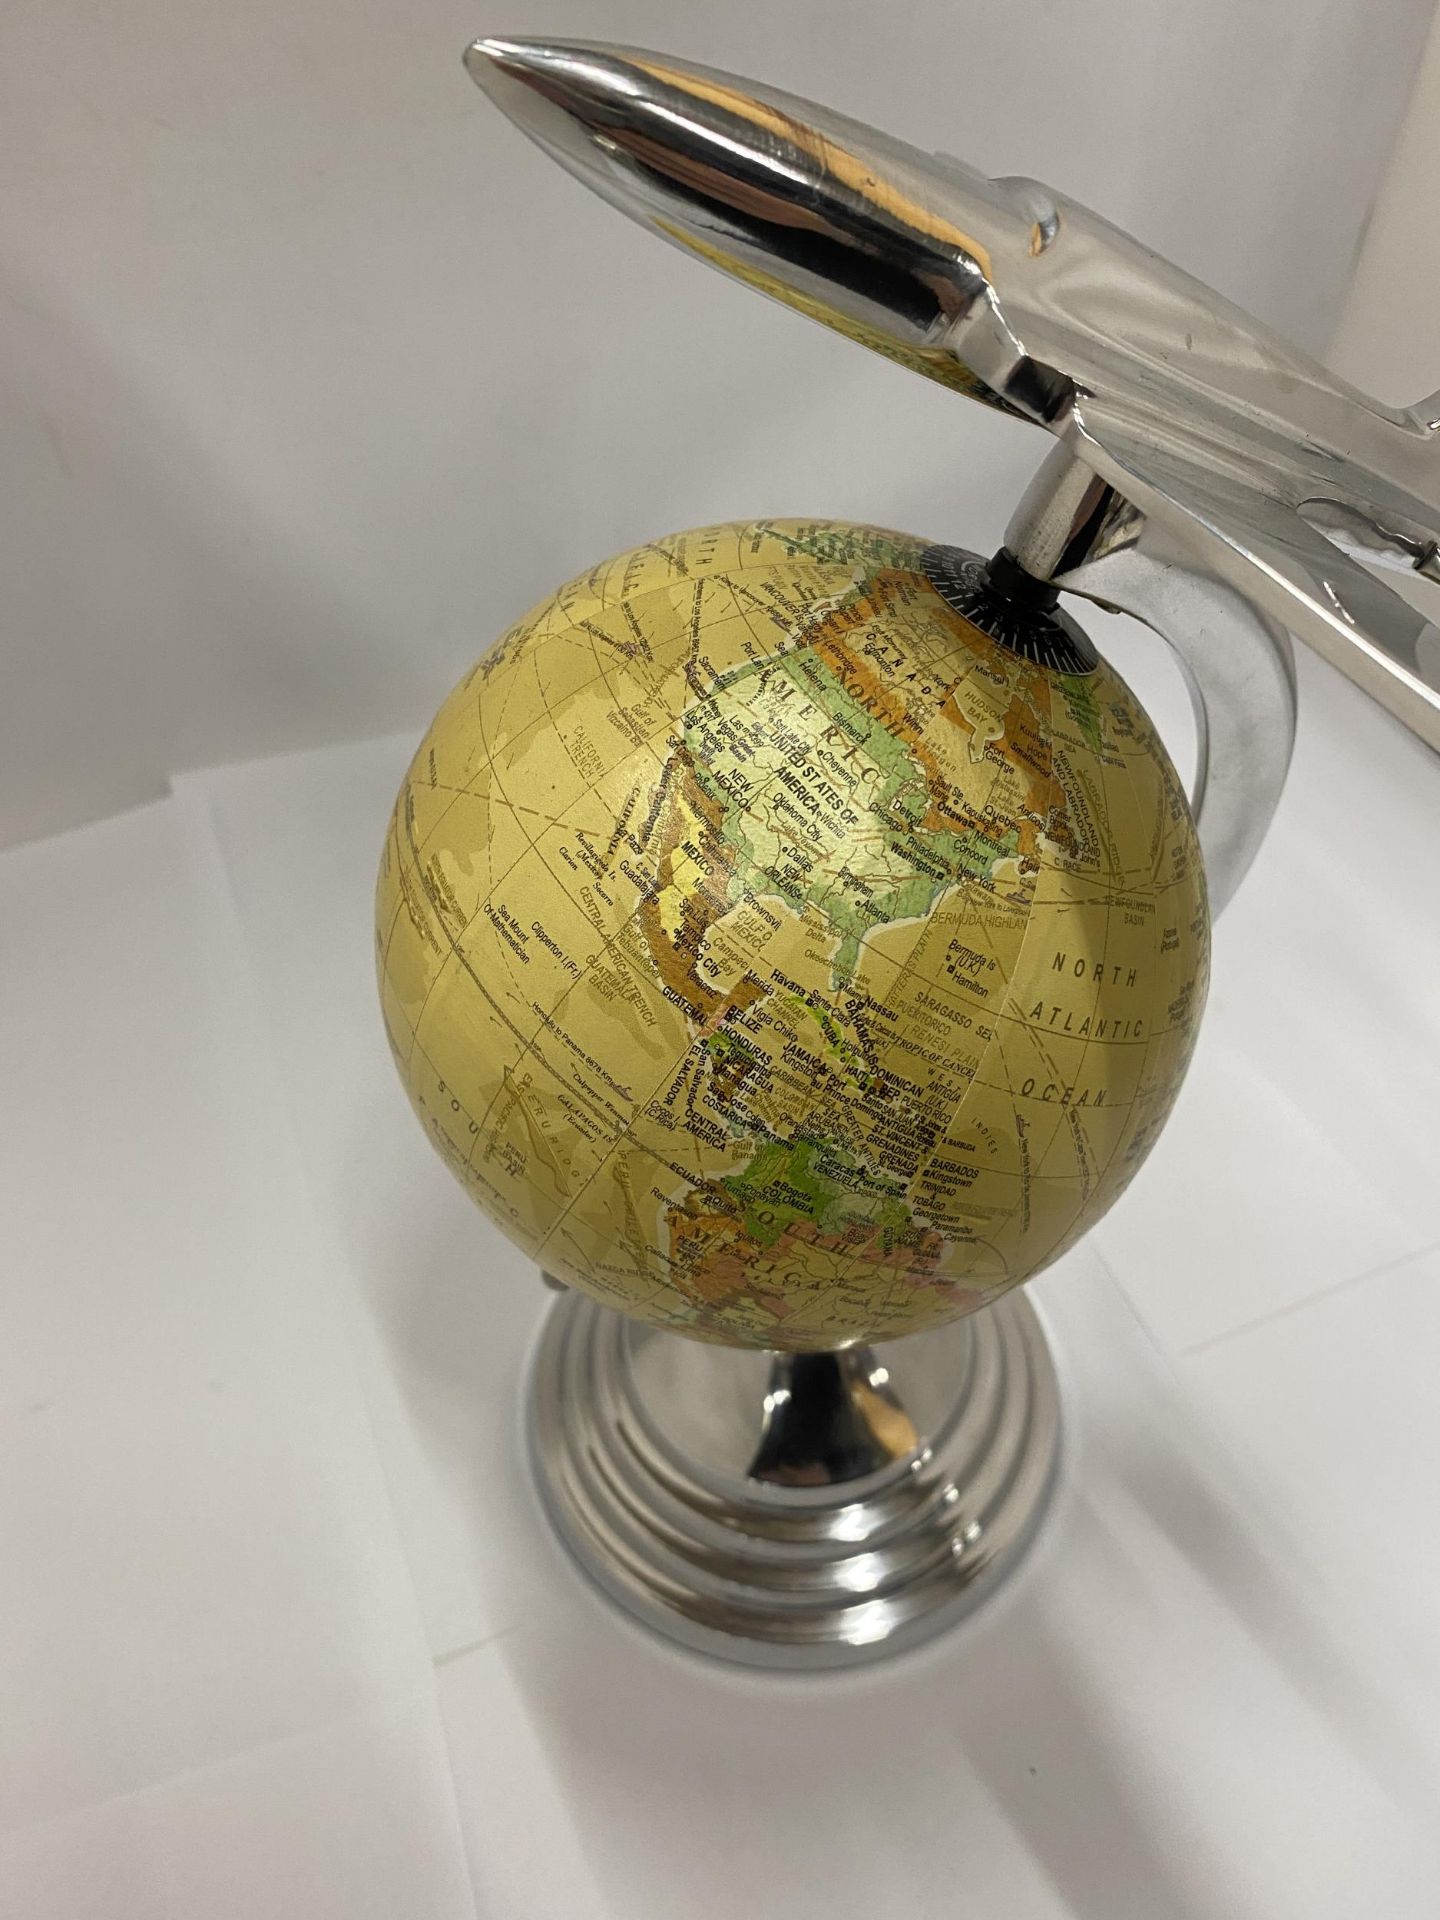 A DESK GLOBE WITH CHROME EFFECT BASE AND AEROPLANE DESIGN - Image 3 of 3